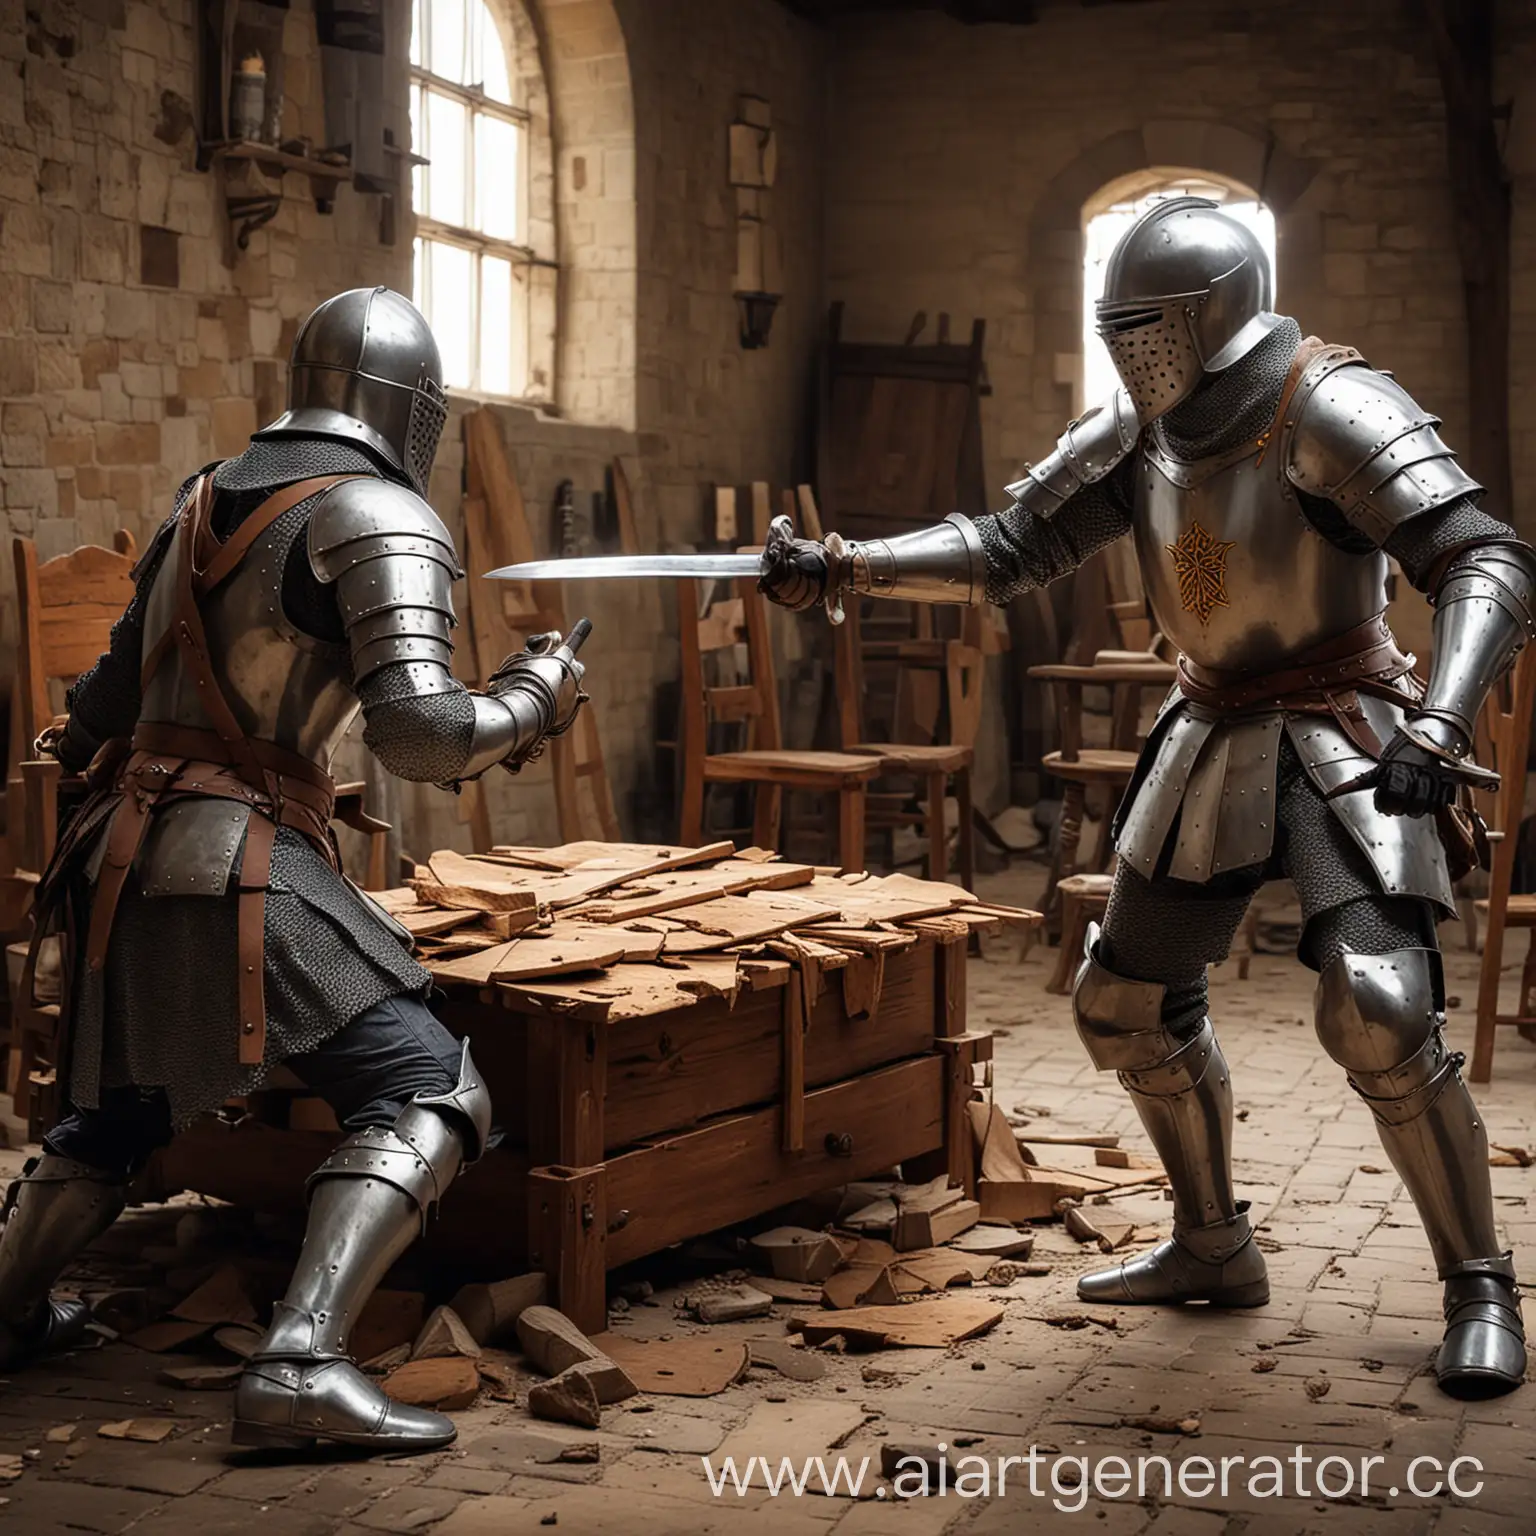 Medieval-Knights-Dueling-for-Throne-Room-Dominance